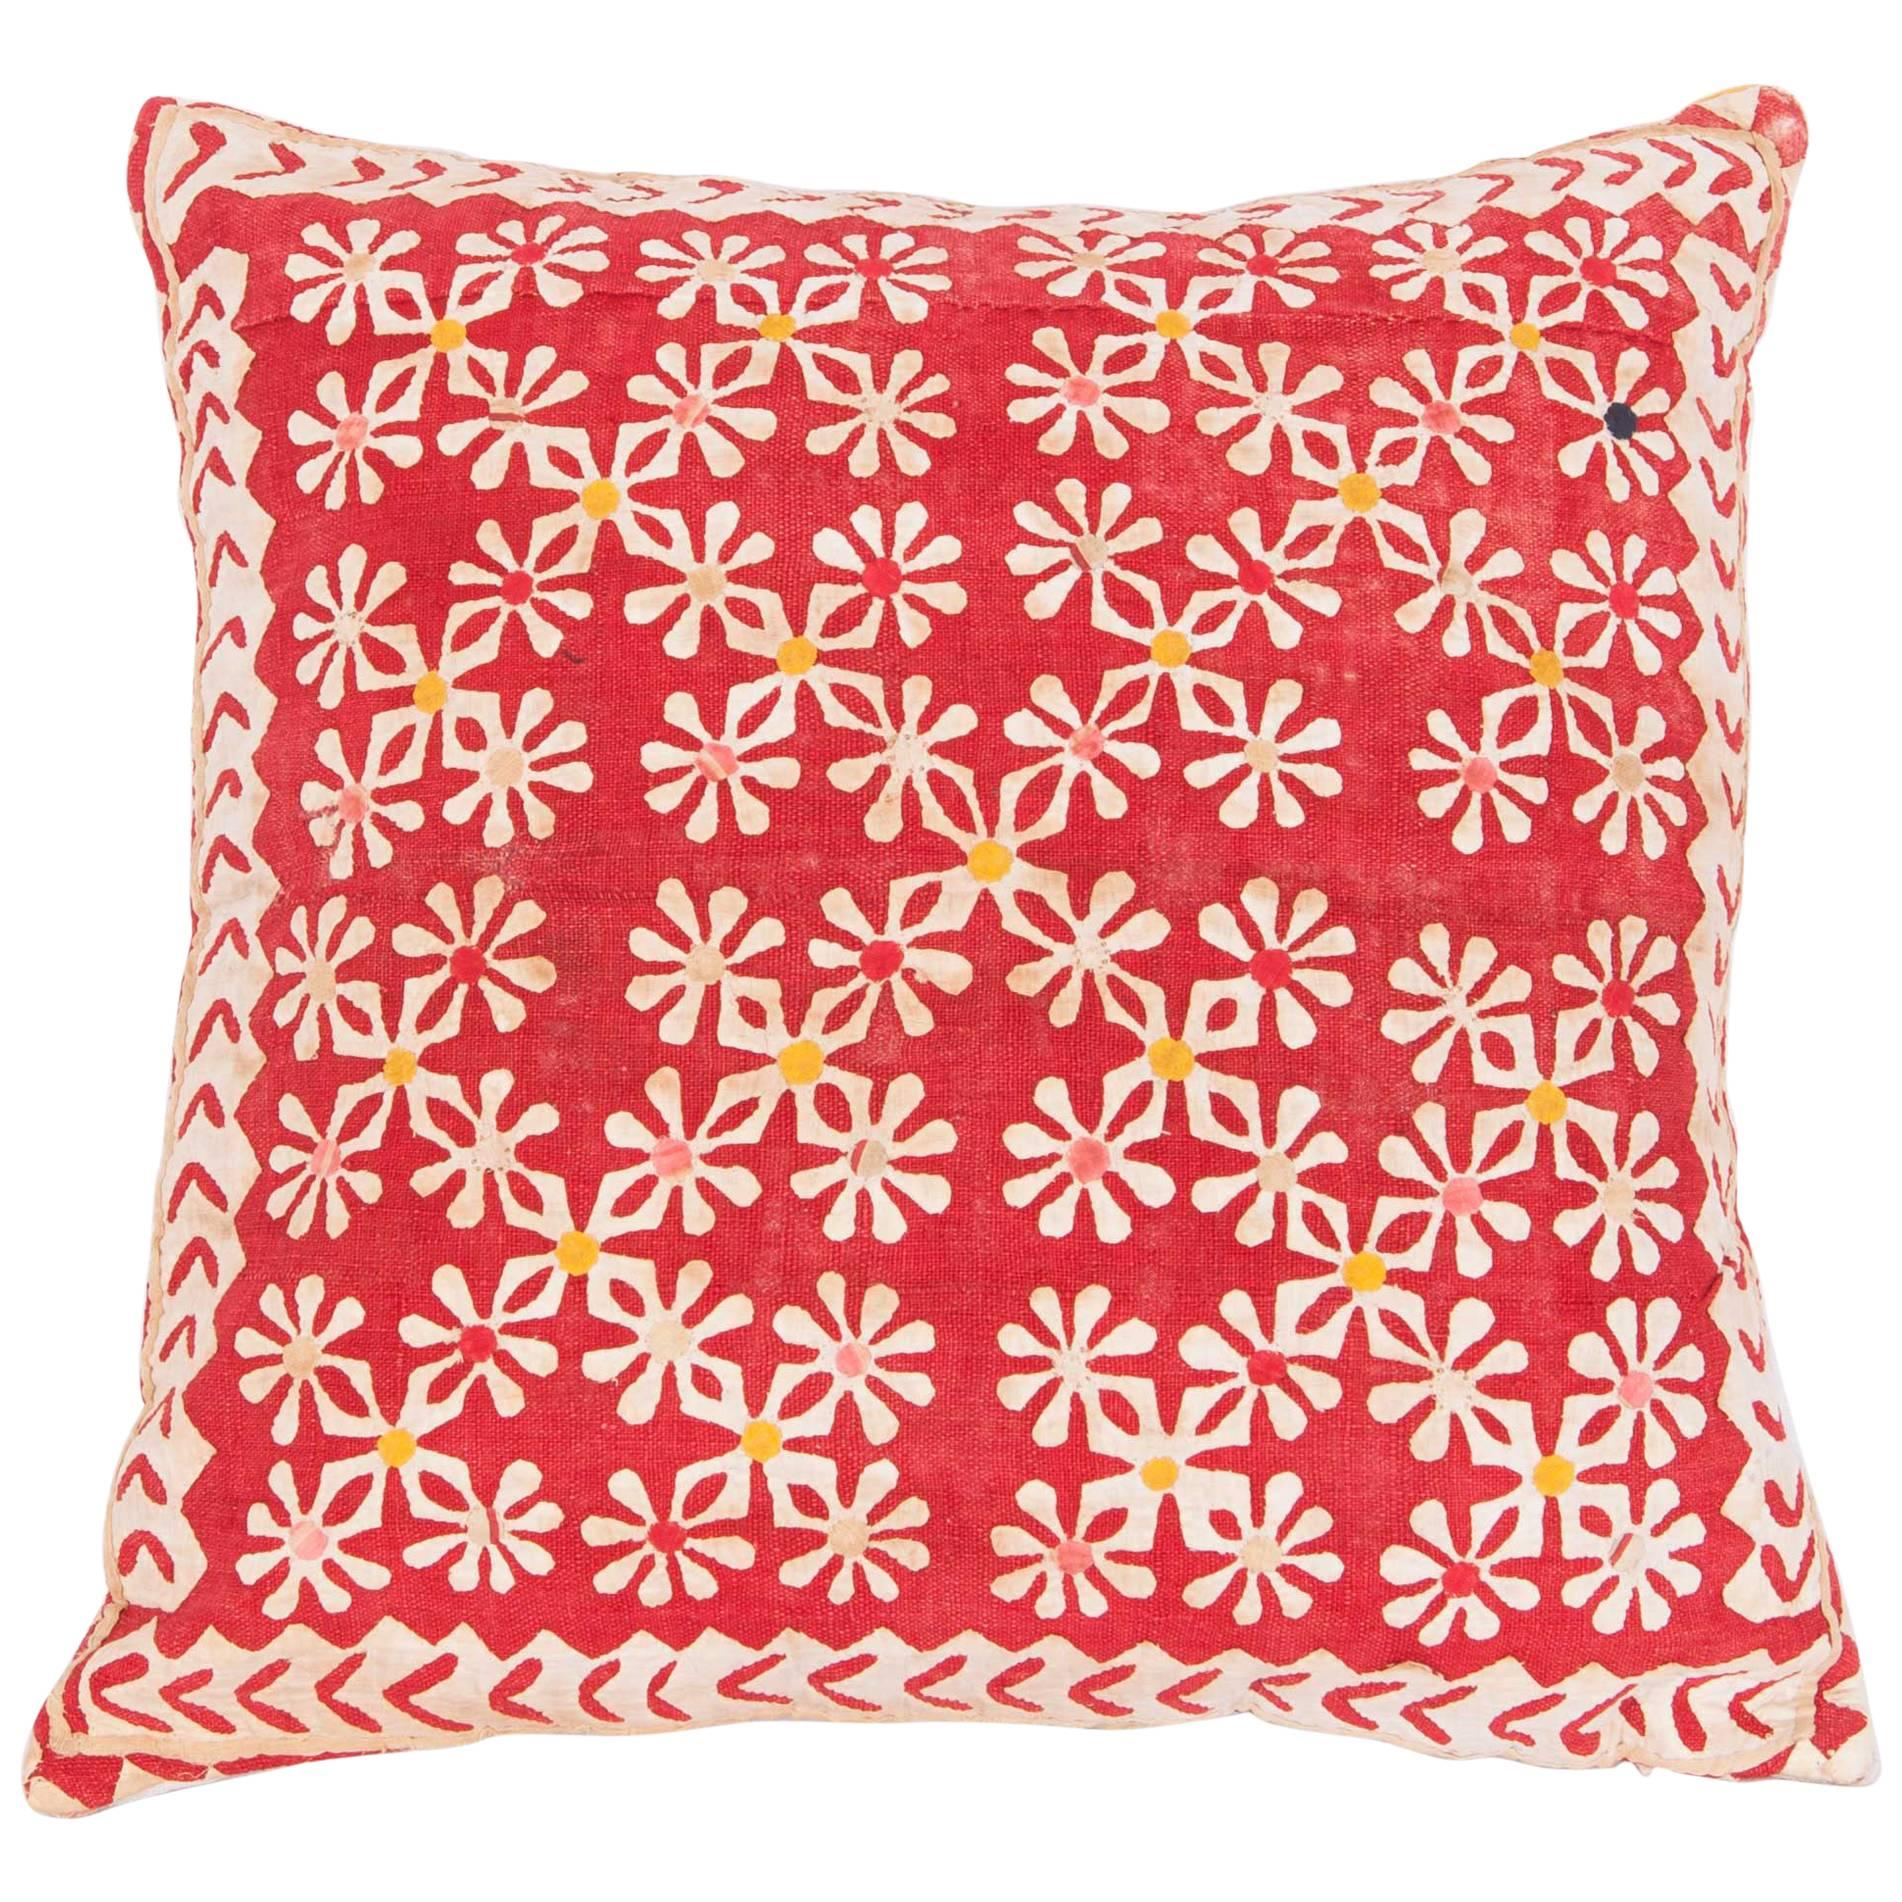 Pillow Case Made from an Early 20th Century Indian Applique Panel